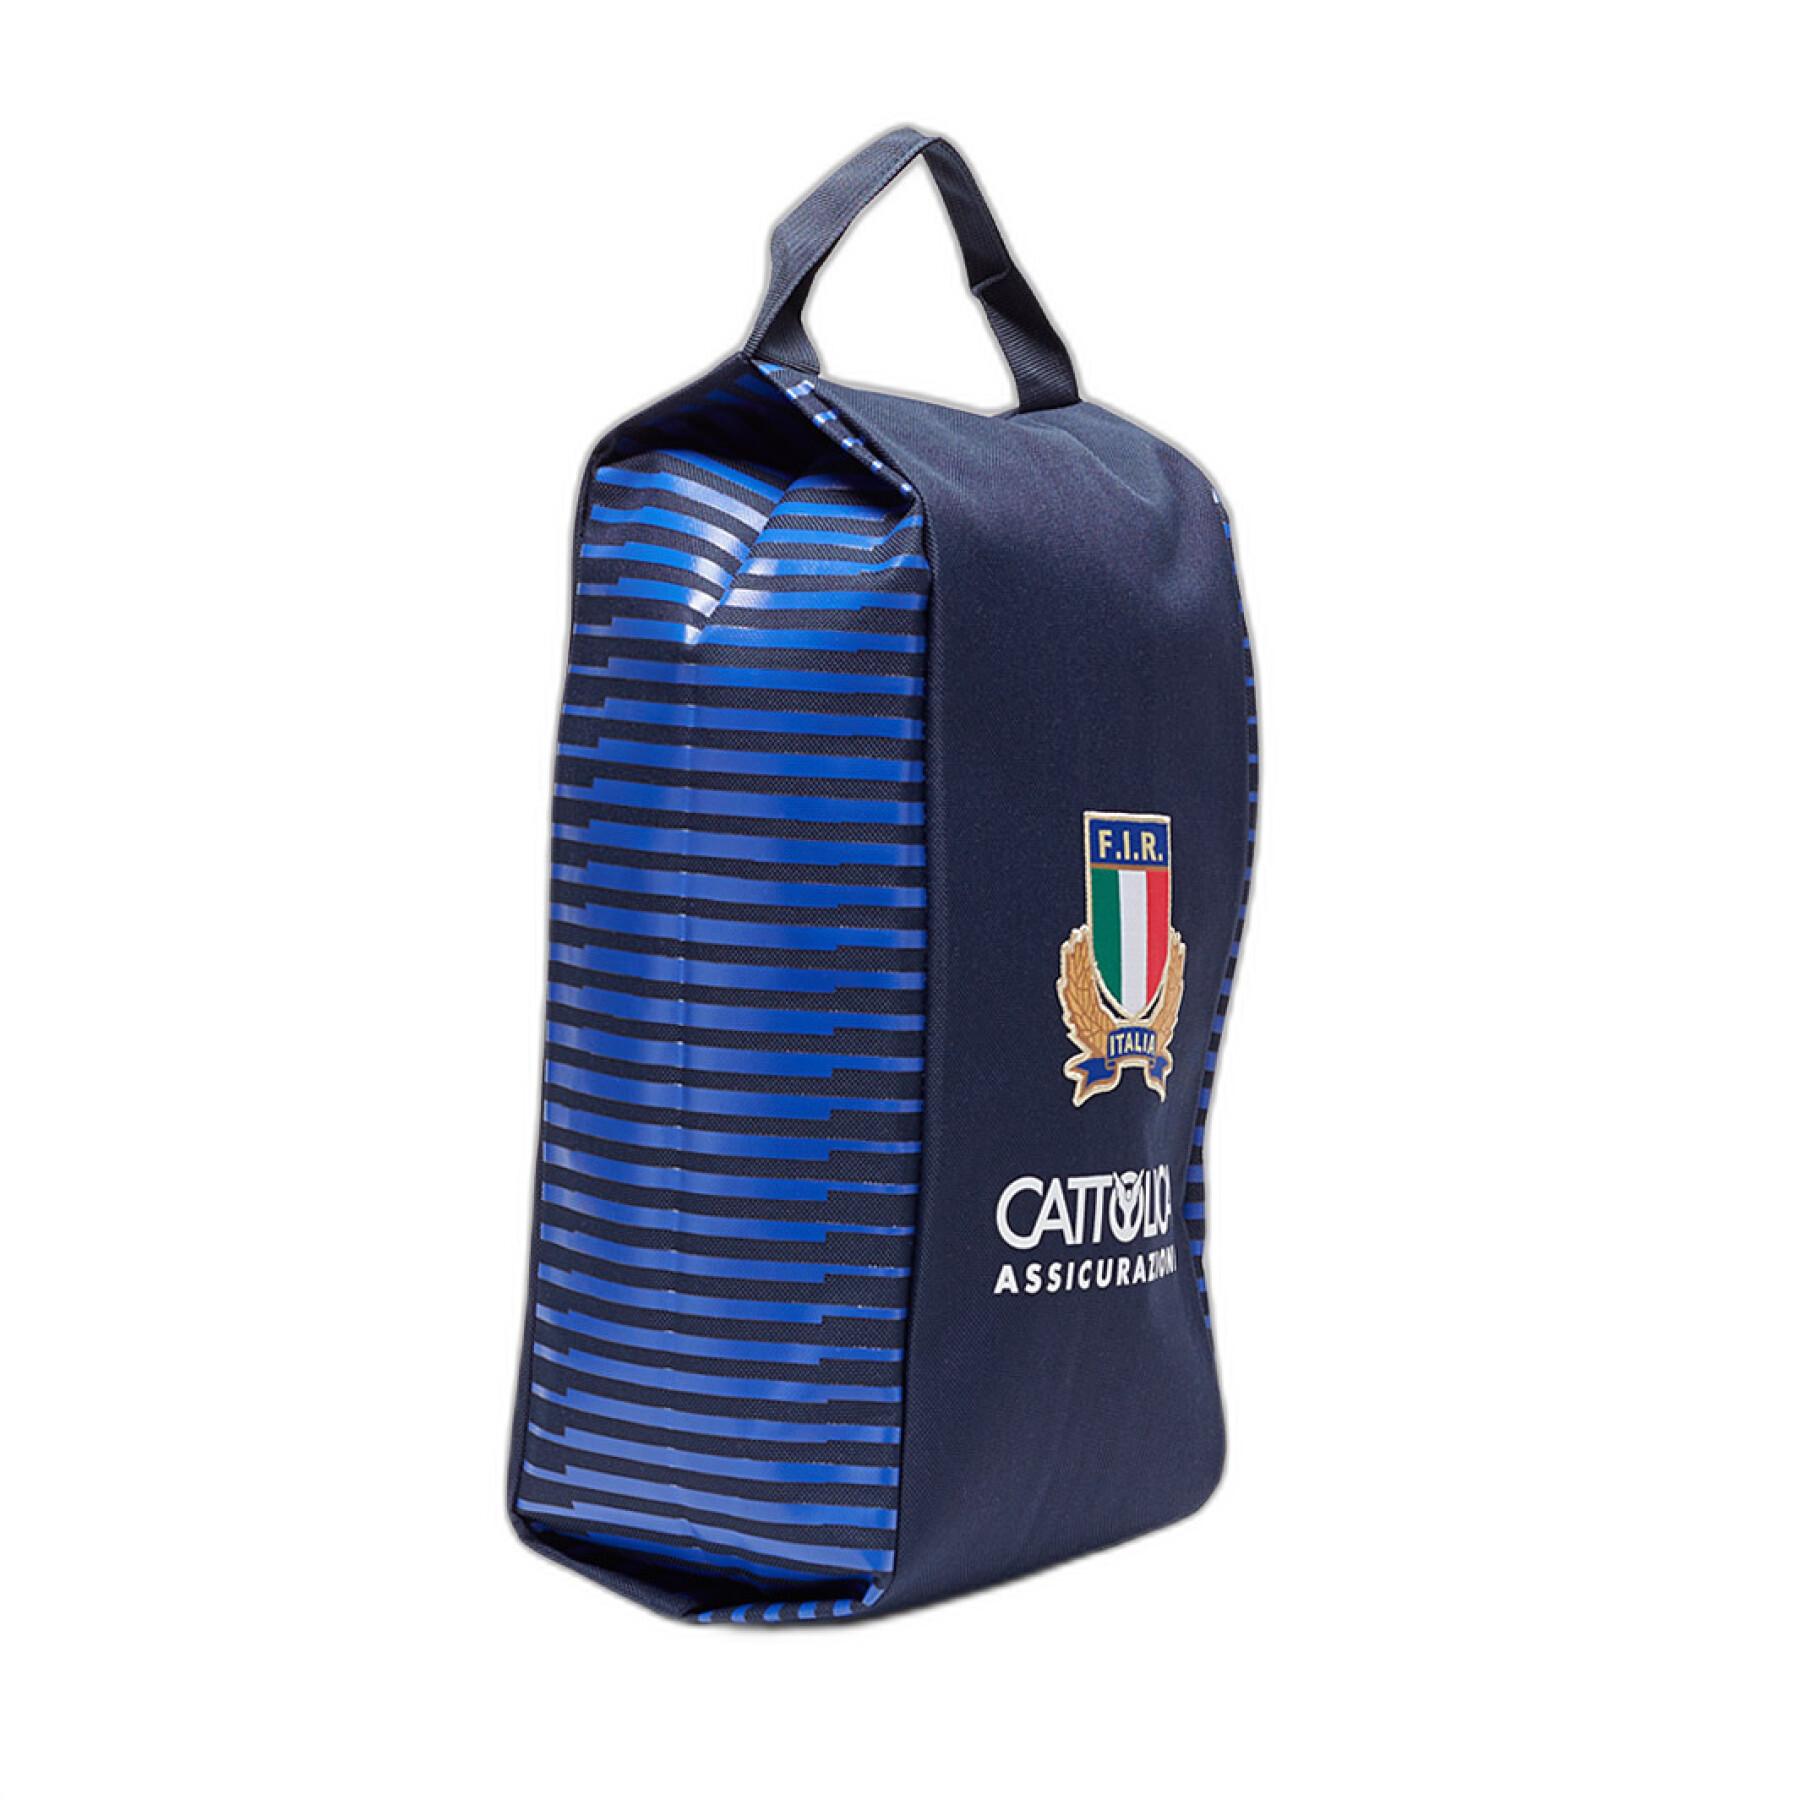 Sac porte-chaussures Italie rugby 2019